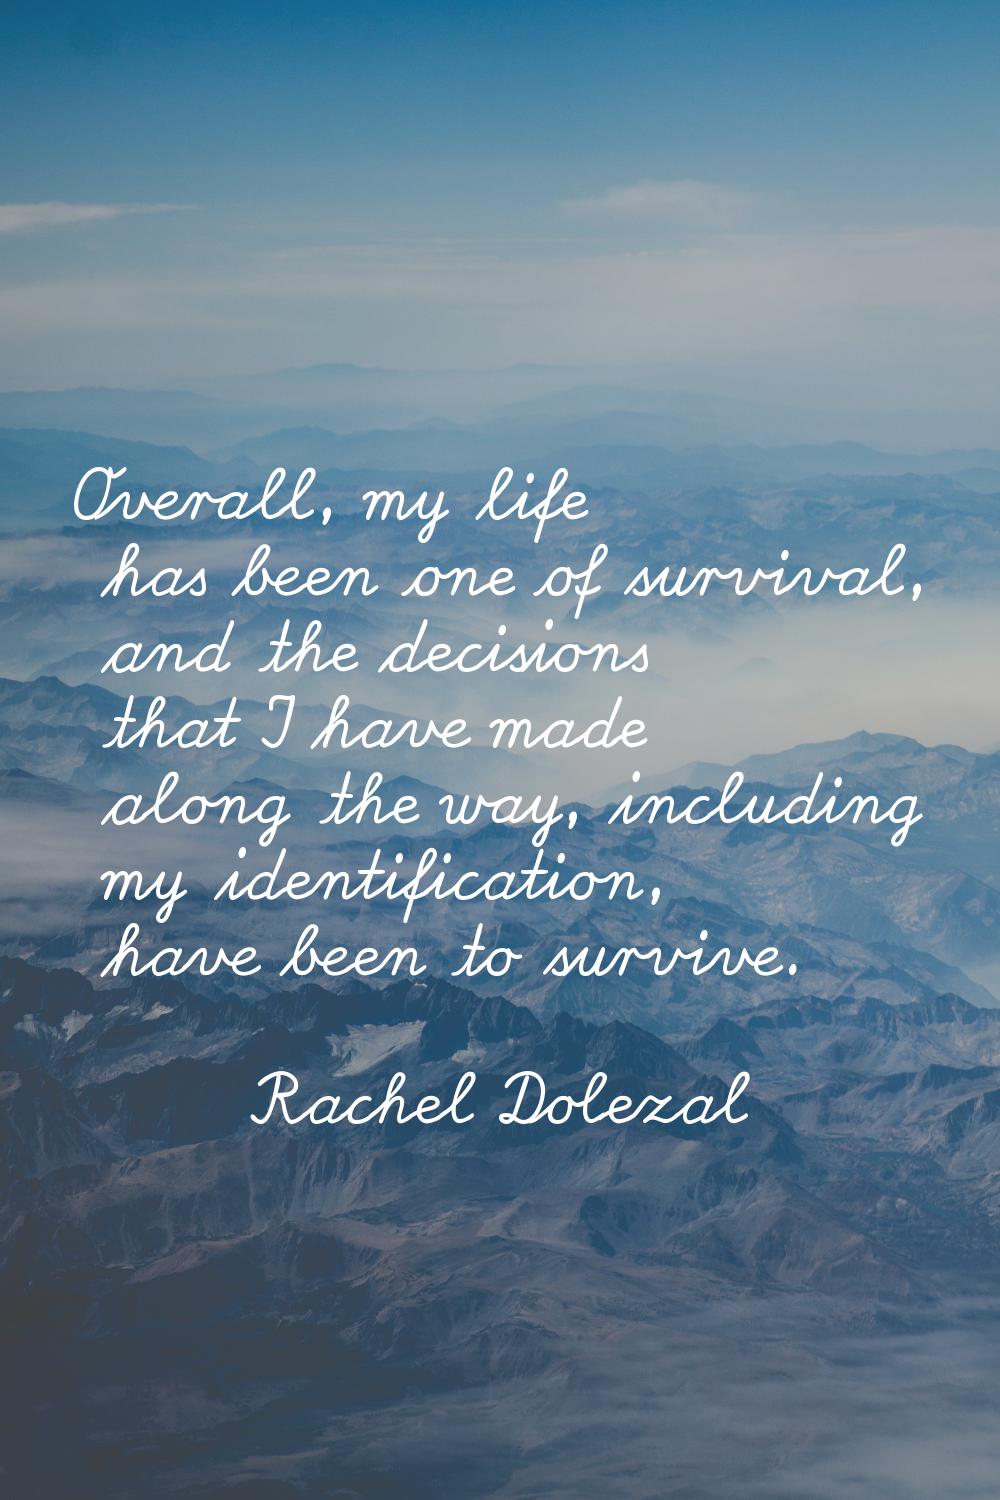 Overall, my life has been one of survival, and the decisions that I have made along the way, includ